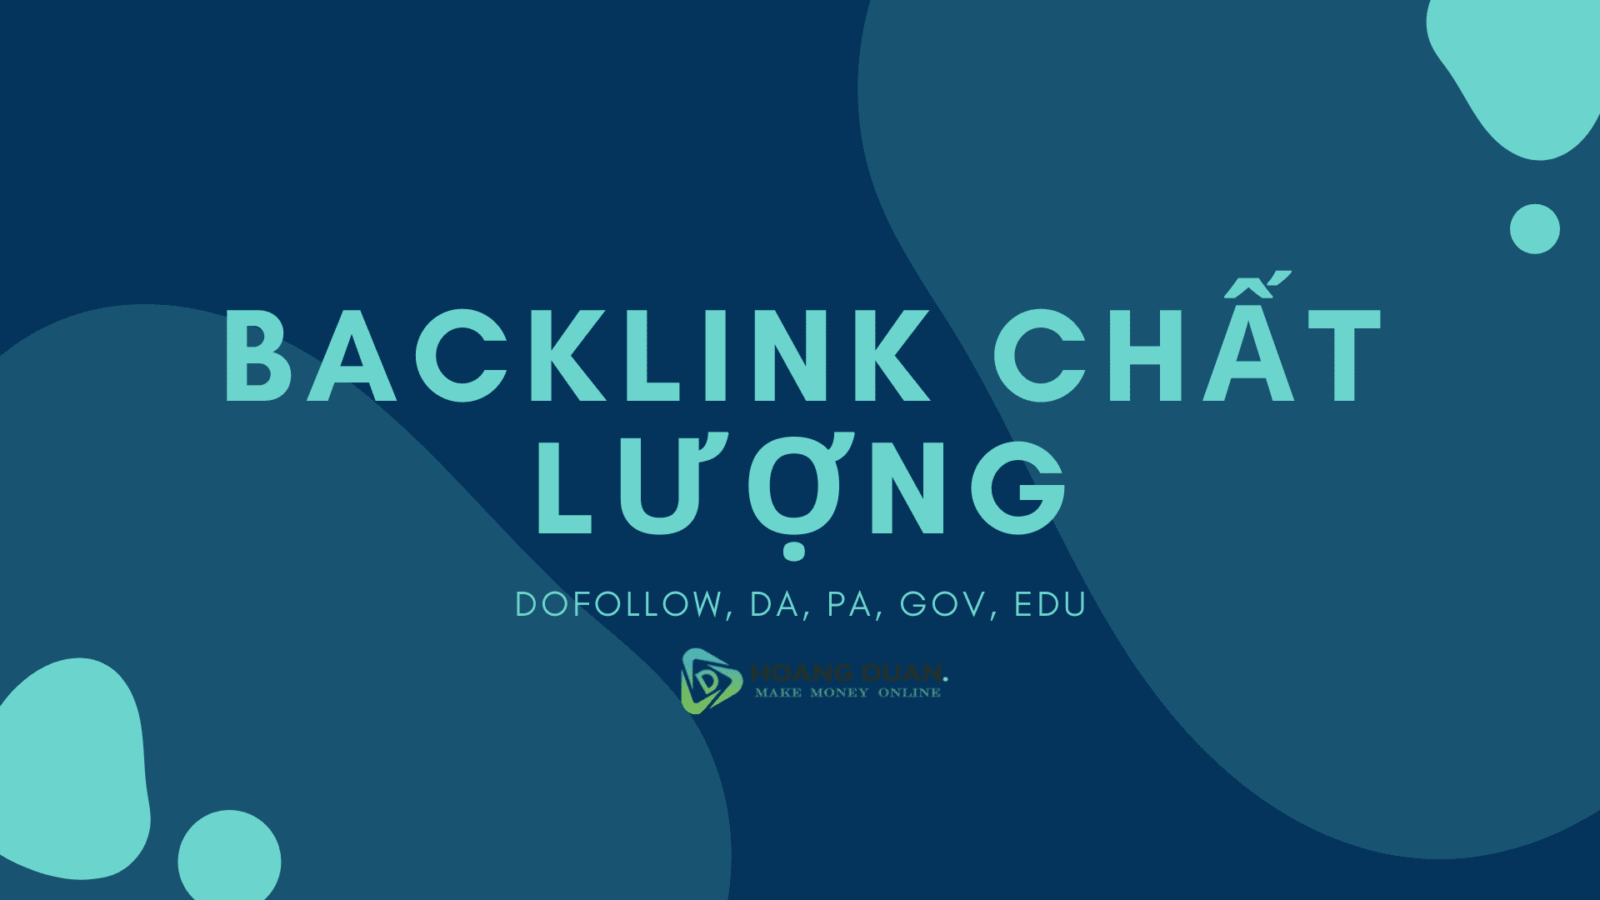 backlink chat luong gov dofollow